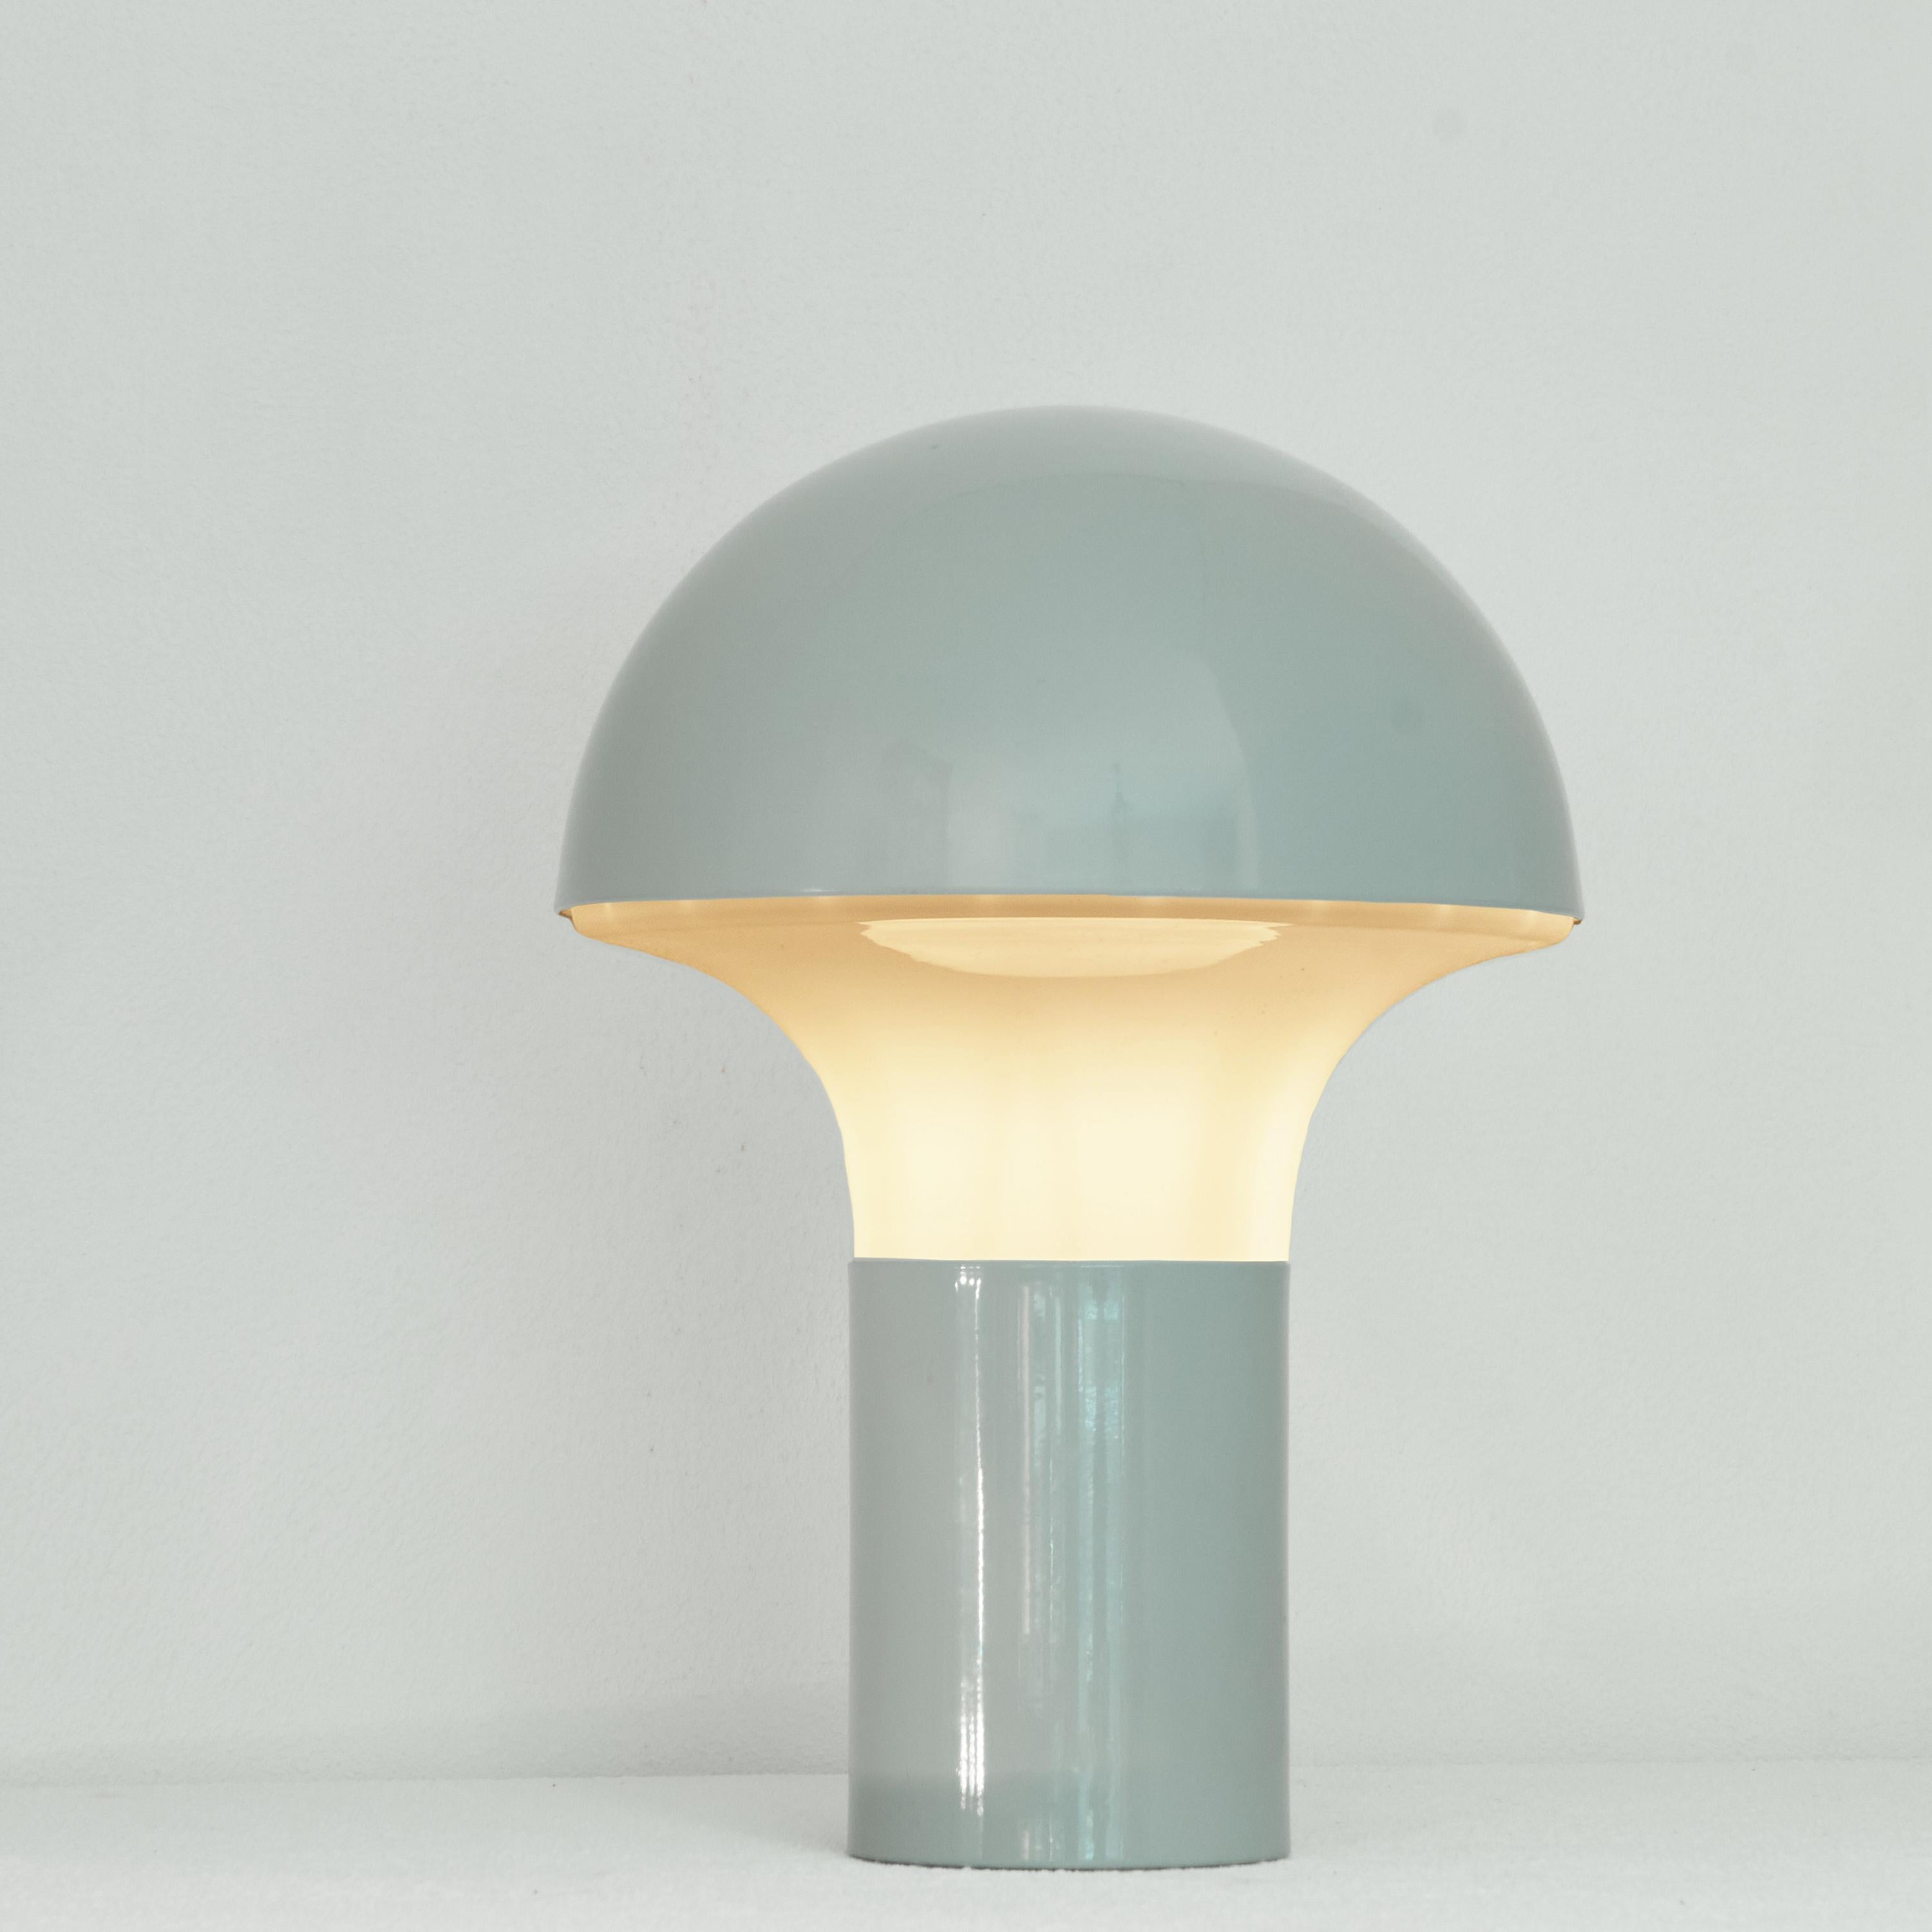 Mushroom table lamp in light blue metal and opaline glass. Fiesole, Florence, Italy, 1970s.

This is a large mushroom table lamp in opaline glass and baby blue from Italy. Made somewhere in the 1970s by a company from Fiesole, Florence. 

This